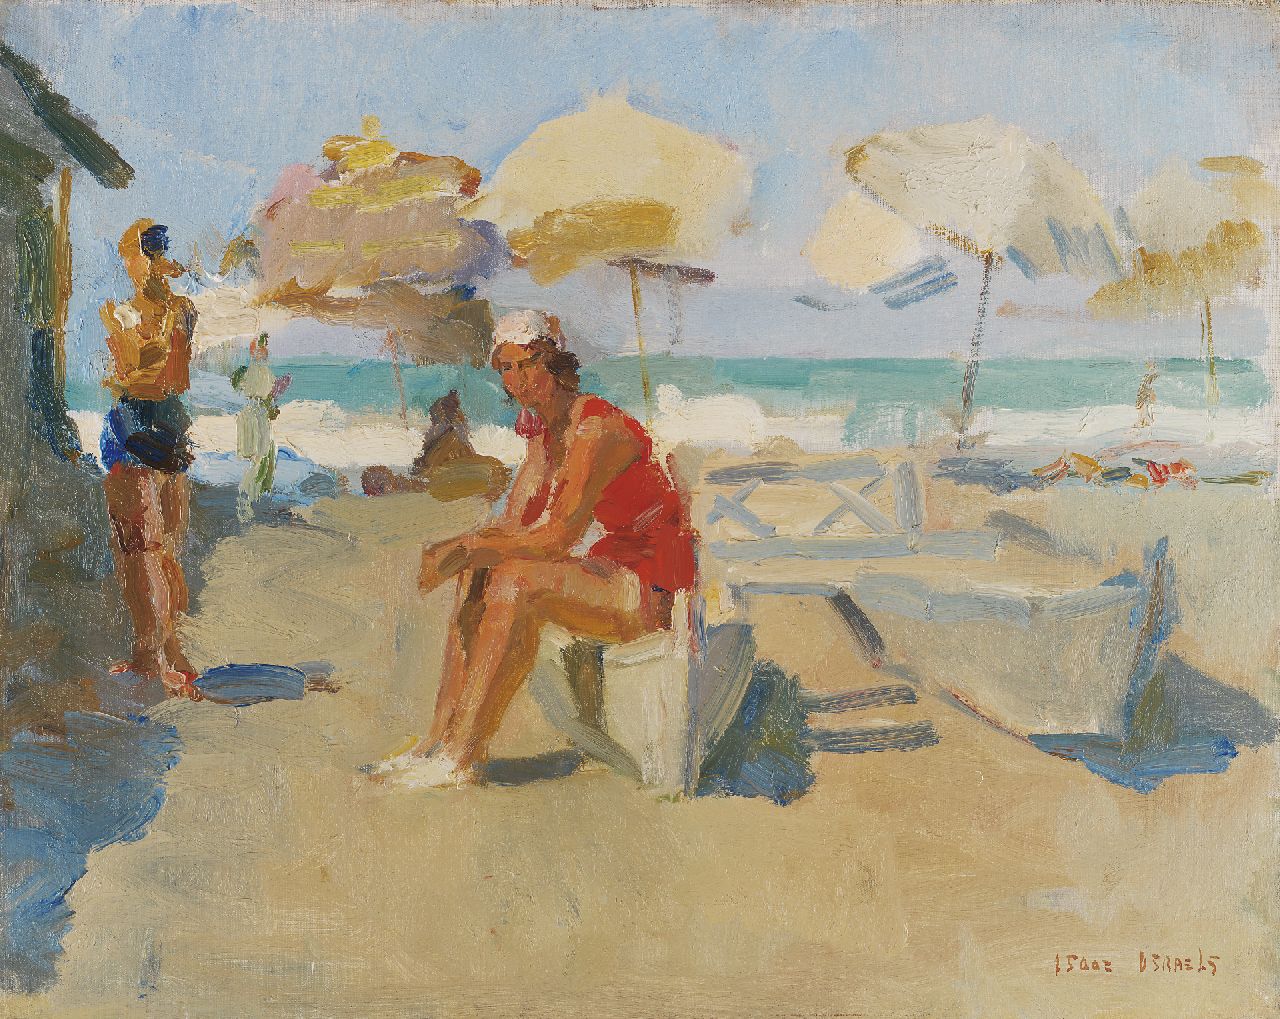 Israels I.L.  | 'Isaac' Lazarus Israels, Figures on the beach of 'Il Lido di Venezia', oil on canvas 40.1 x 50.3 cm, signed l.r. and painted circa 1927